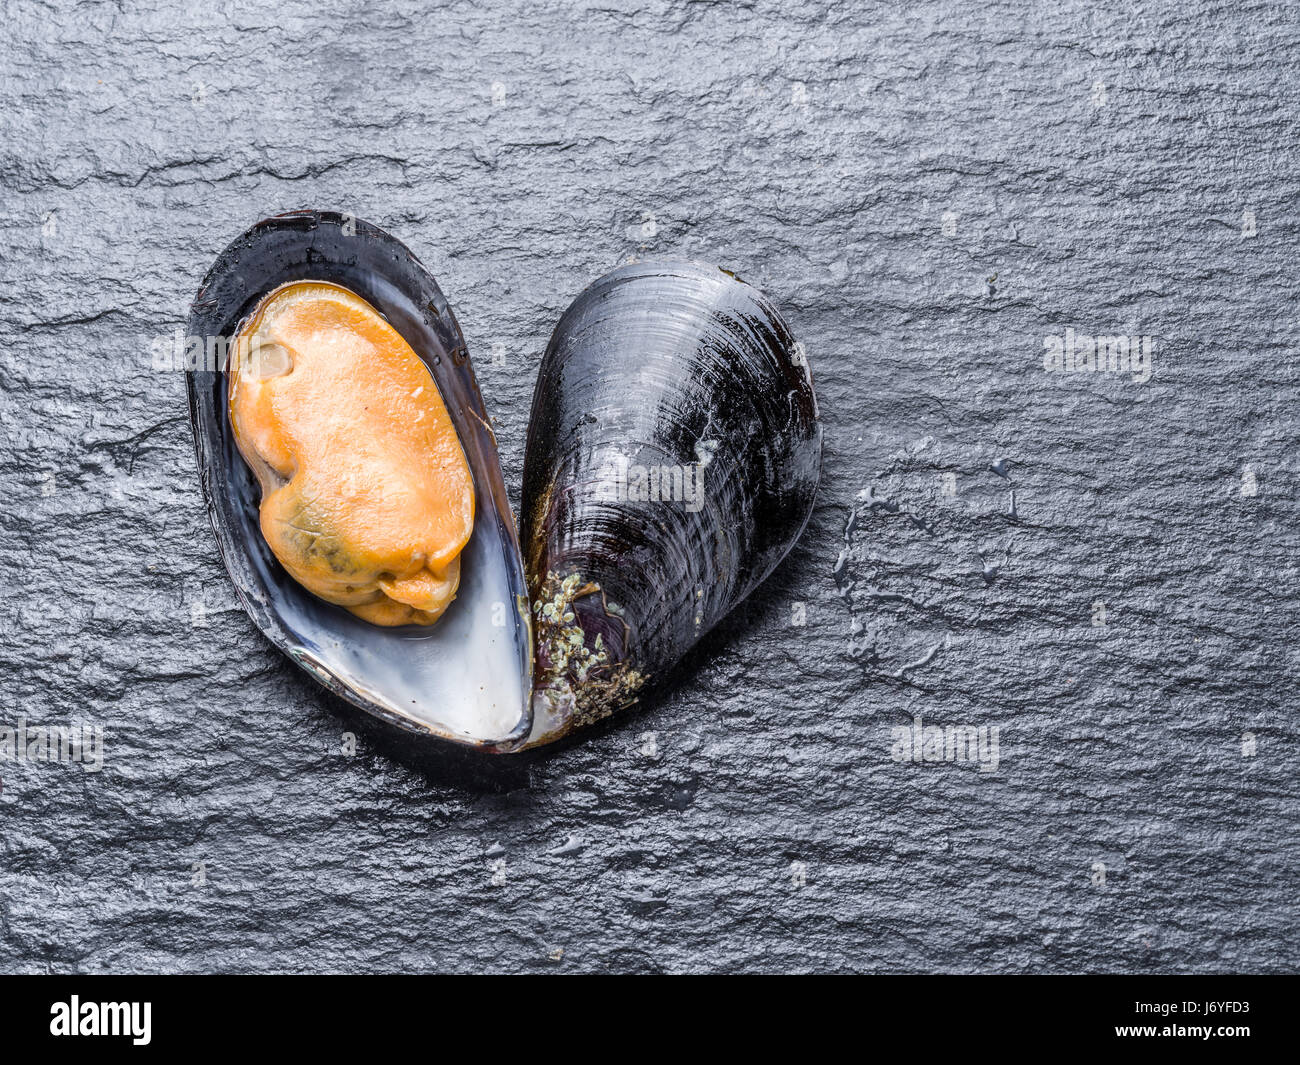 Boiled mussel on the graphite background. Stock Photo